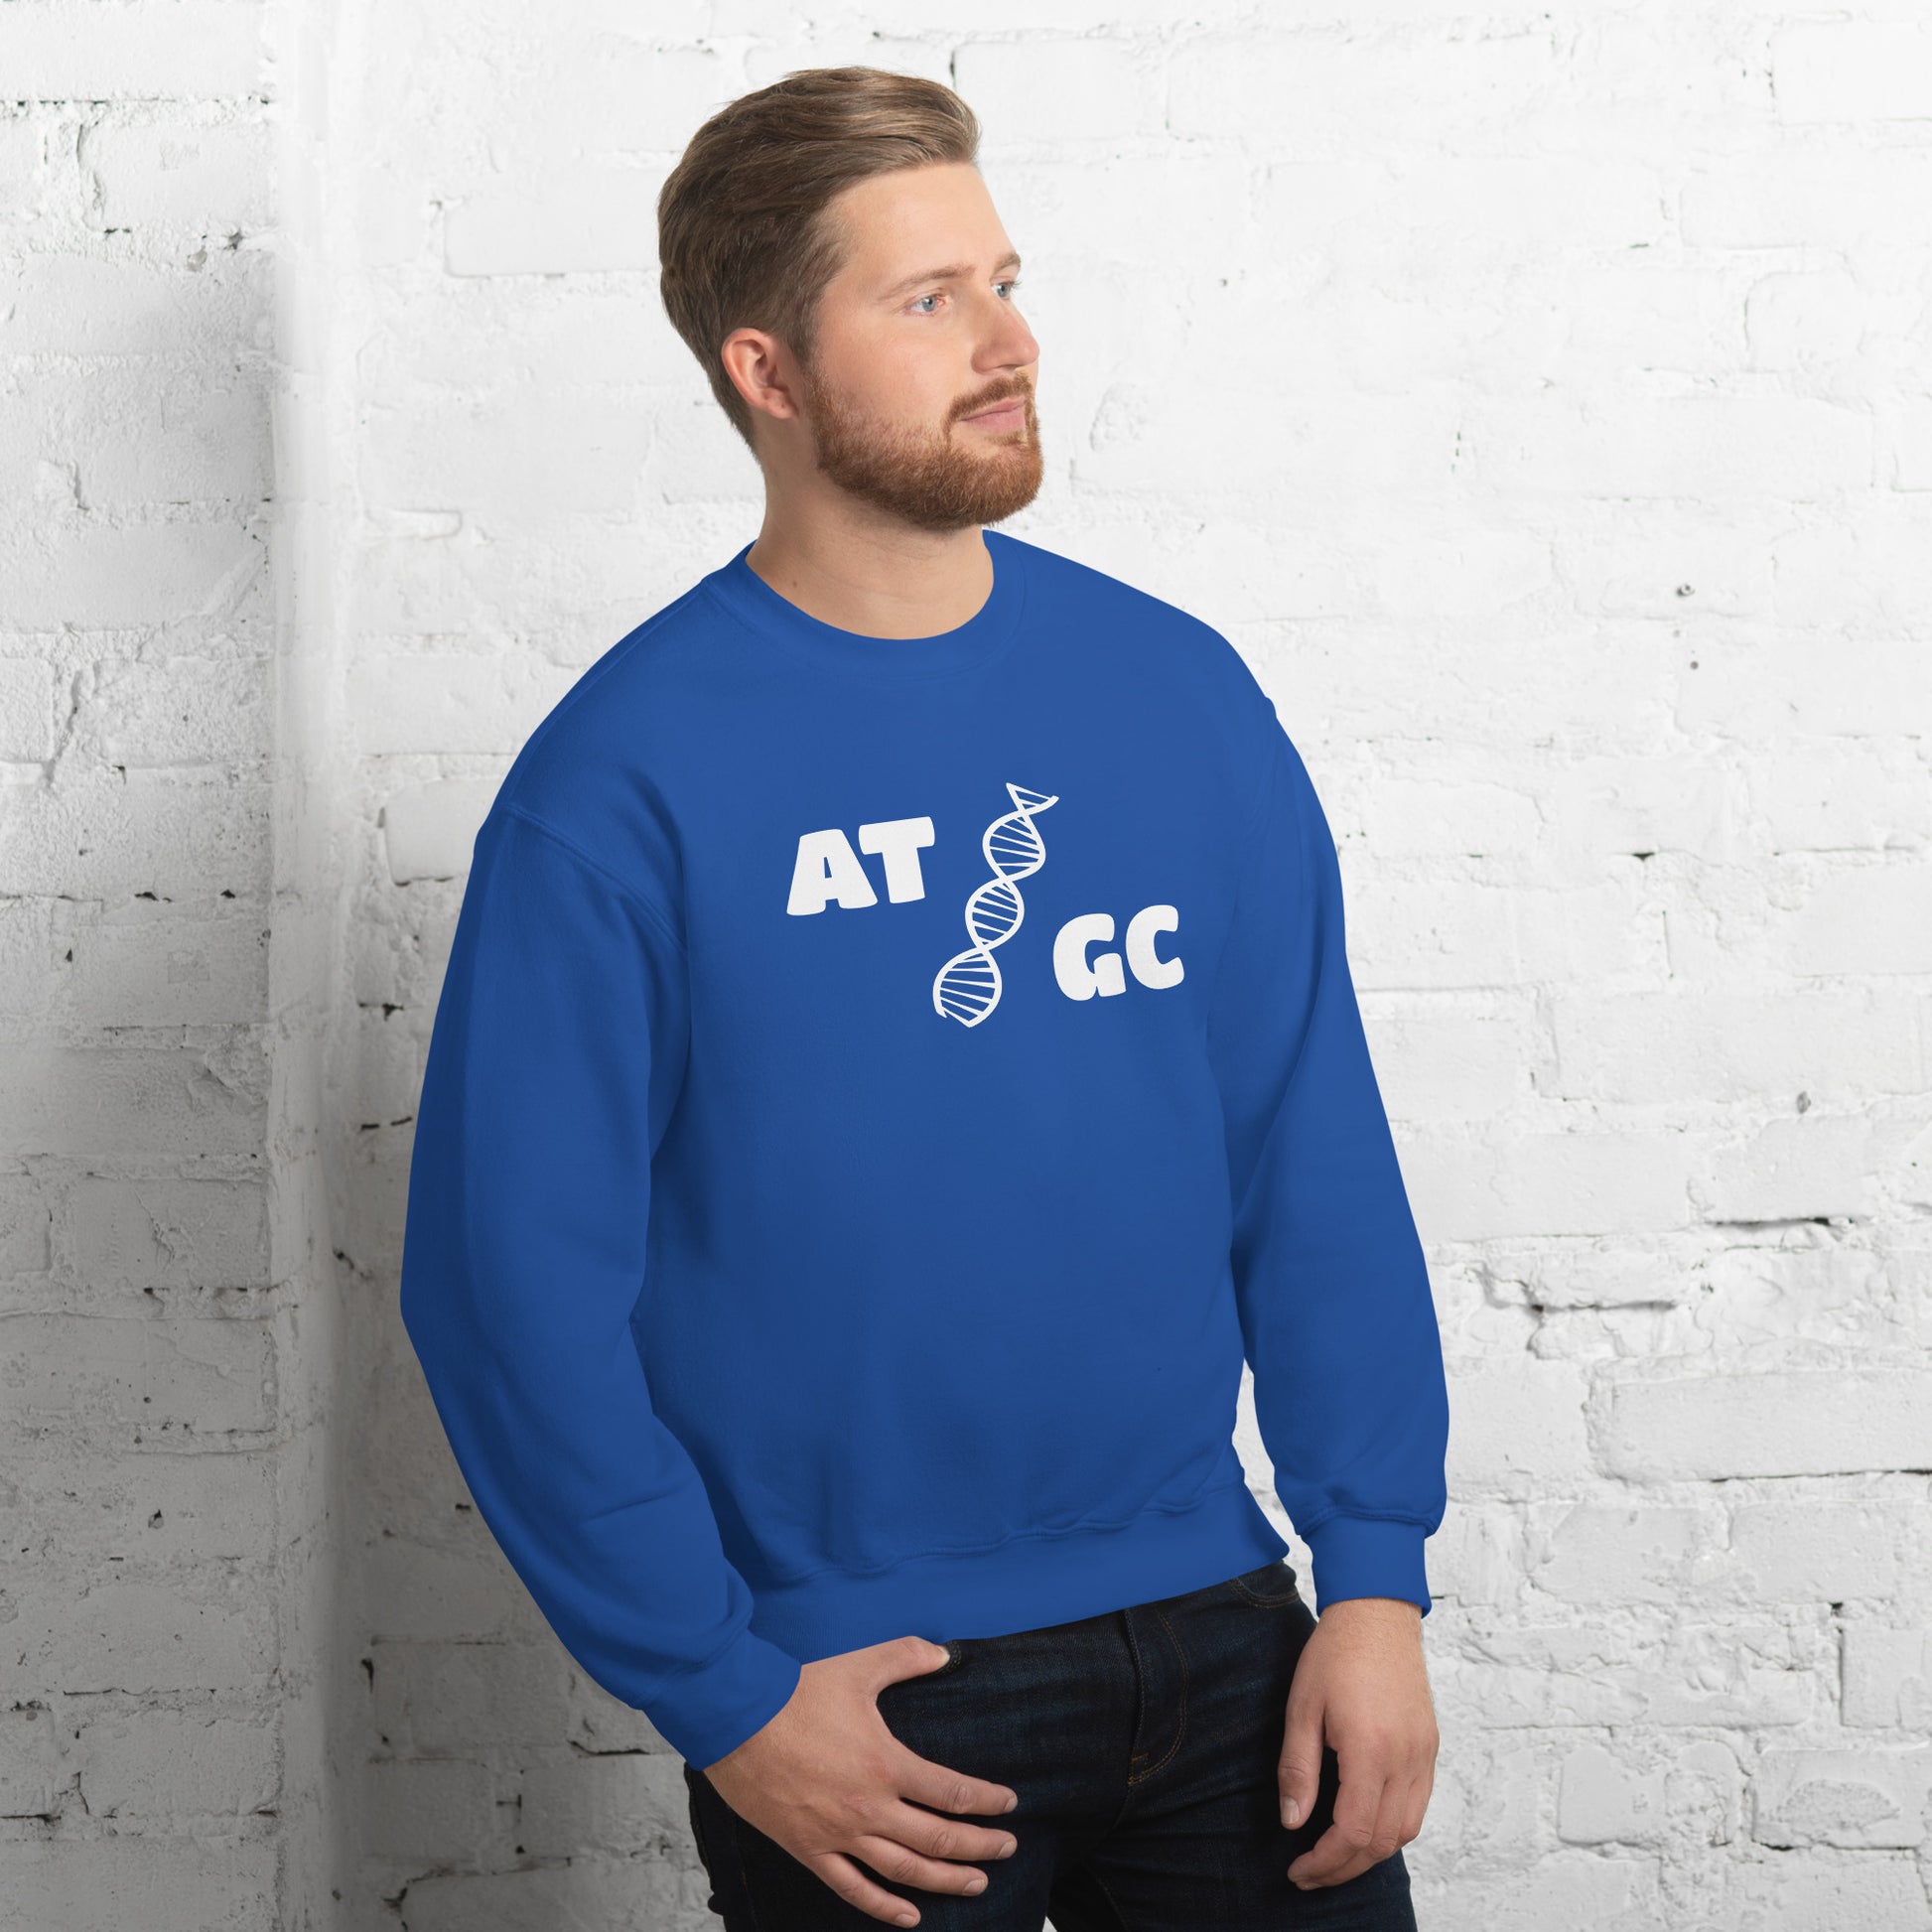 Men with royal blue sweatshirt with image of a DNA string and the text "ATGC"